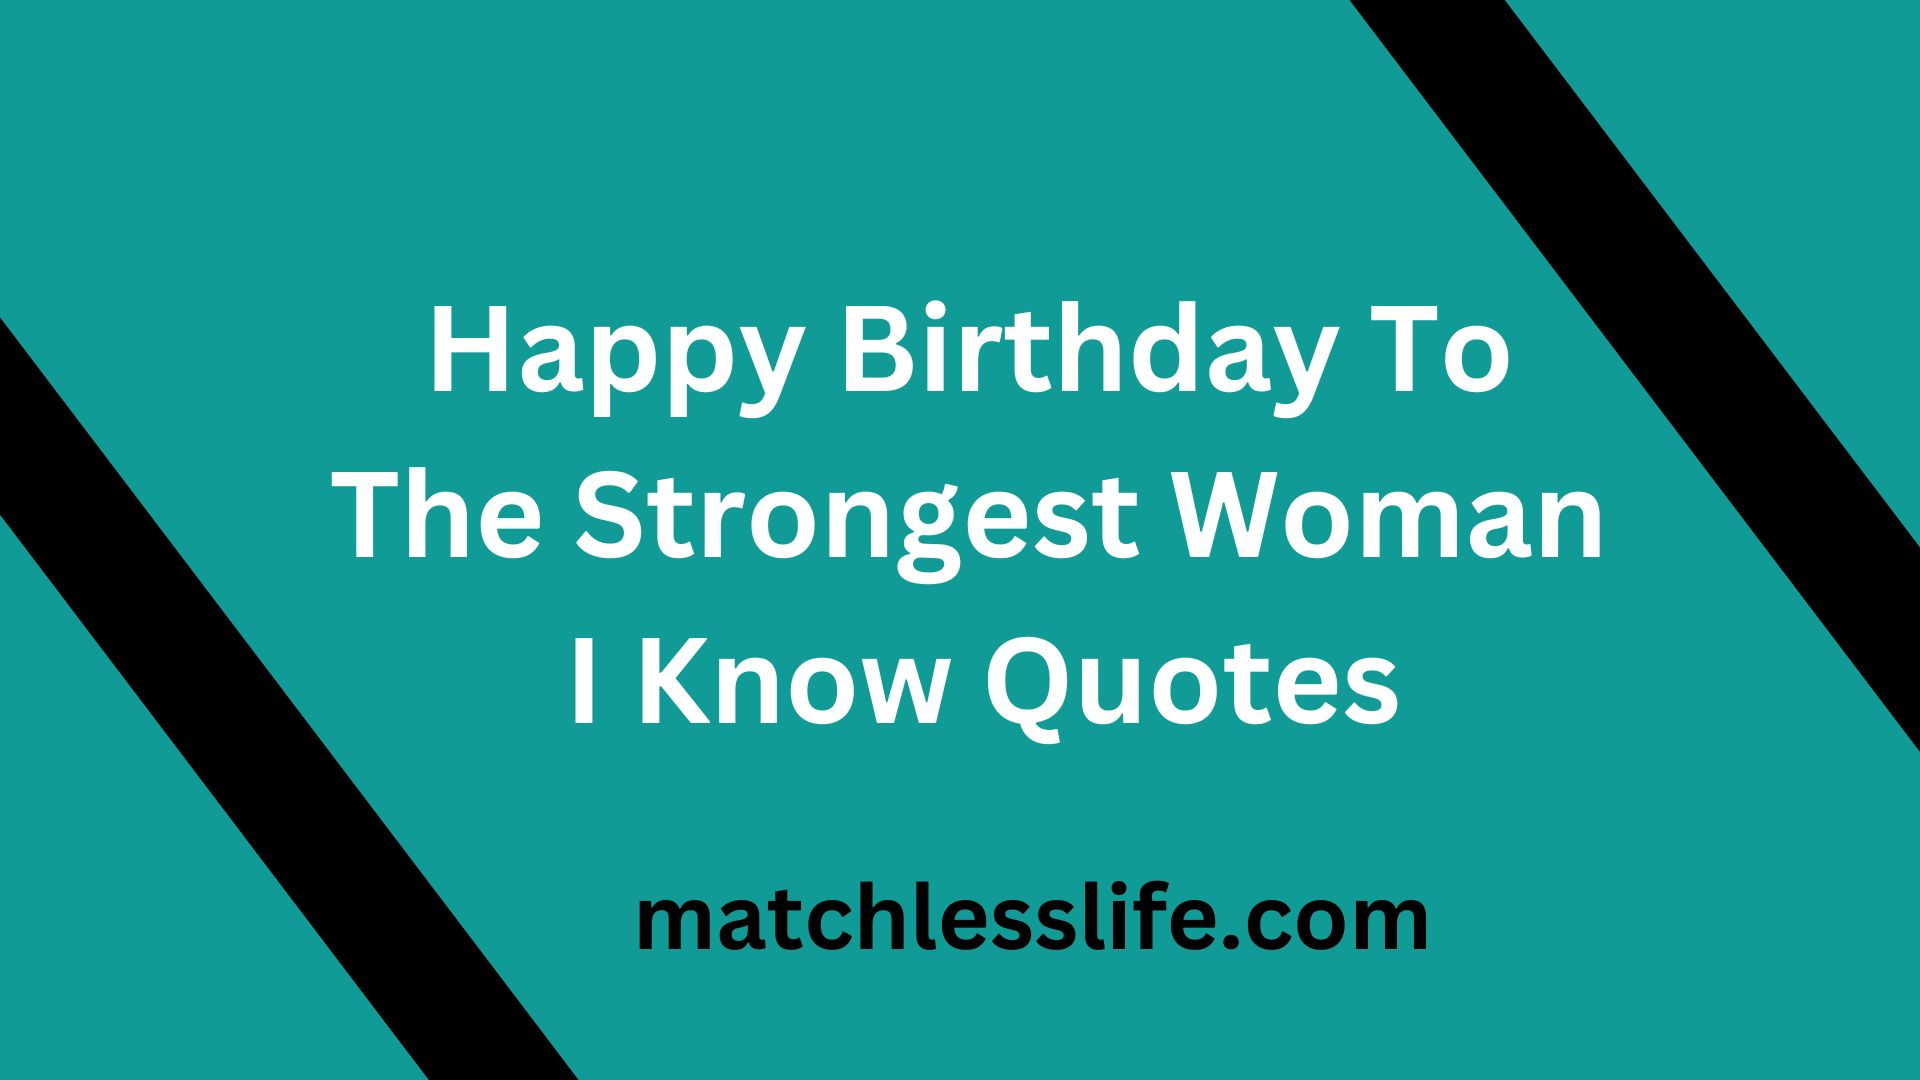 Happy Birthday To The Strongest Woman I Know Quotes